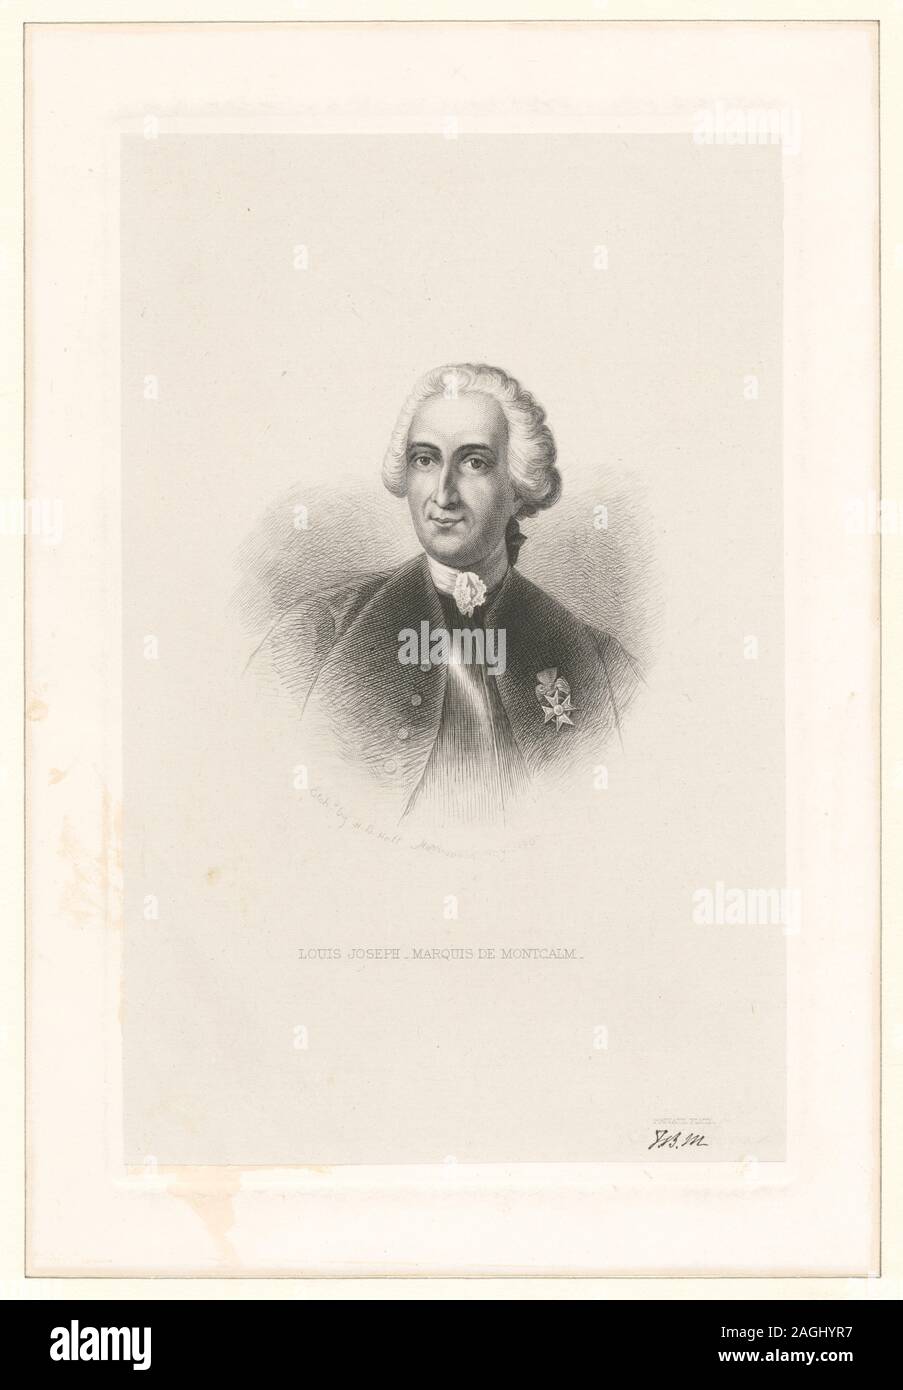 Volume numbers given here refer to the original volume numbers of the publication, not of Lossing's publication. Title from title page of extra-illustrated volume. EM4520; Louis Joseph, Marquis de Montcalm. Stock Photo